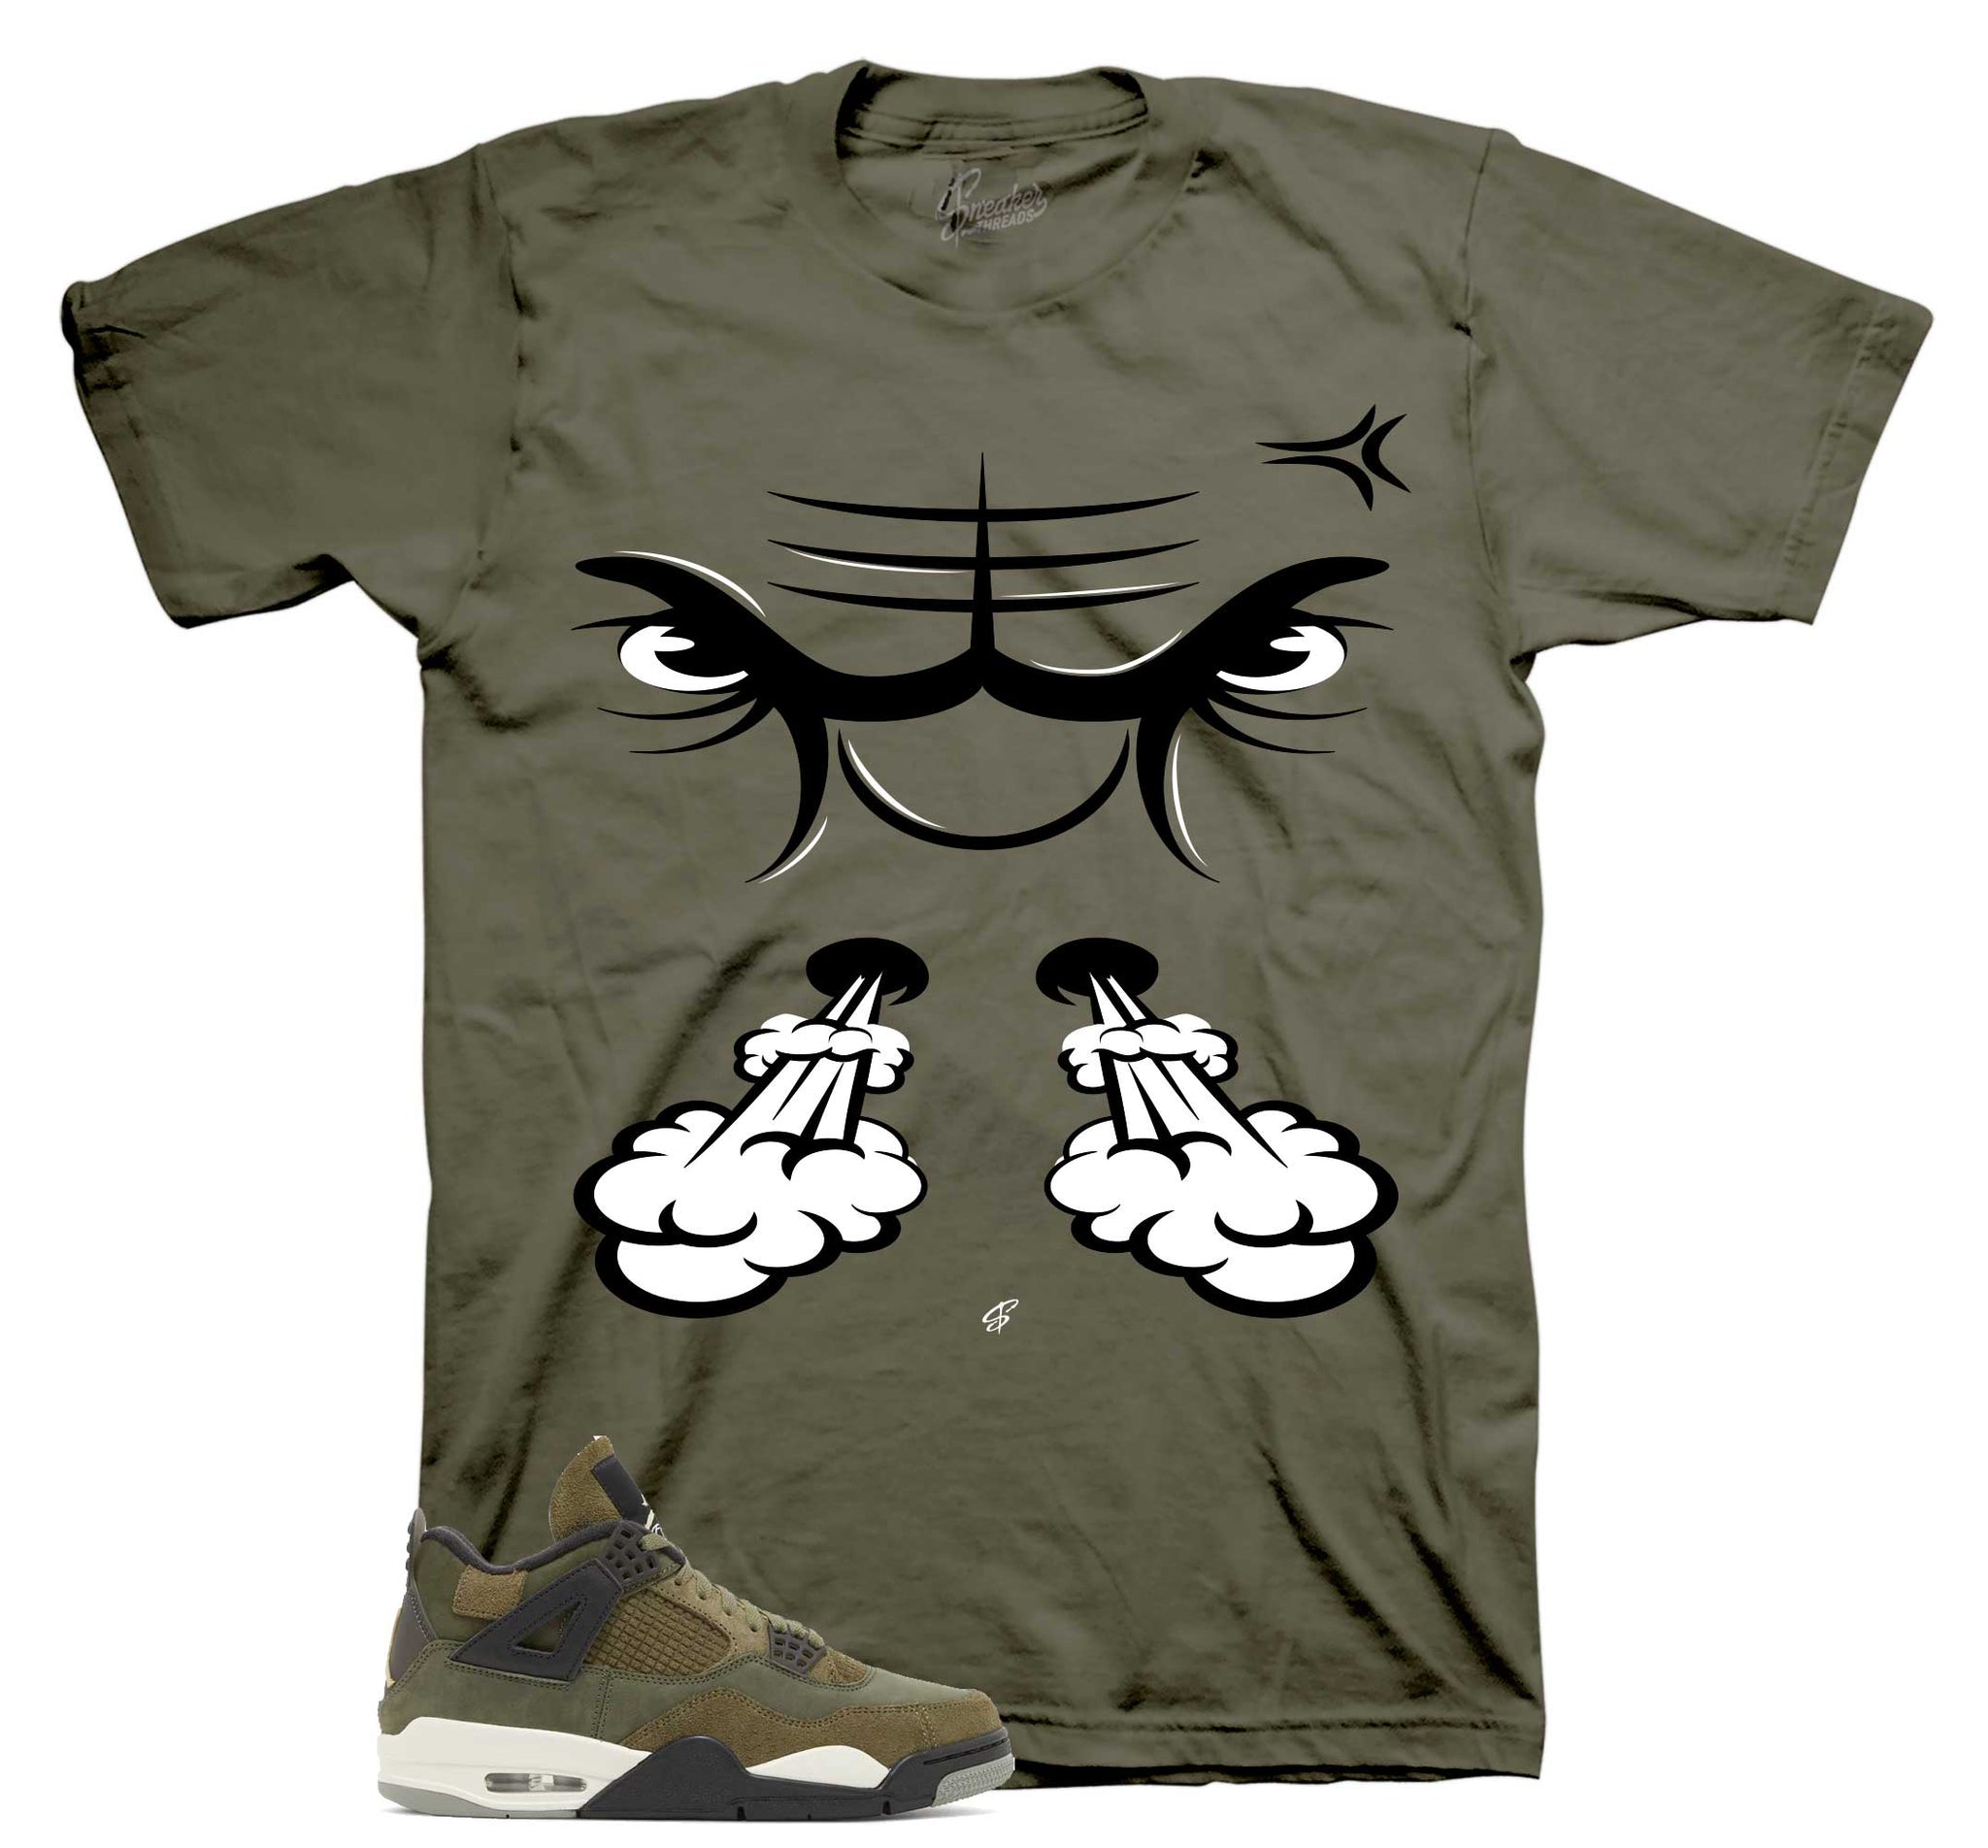 Retro 4 Craft Olive Shirt -  Raging Face - Military Green